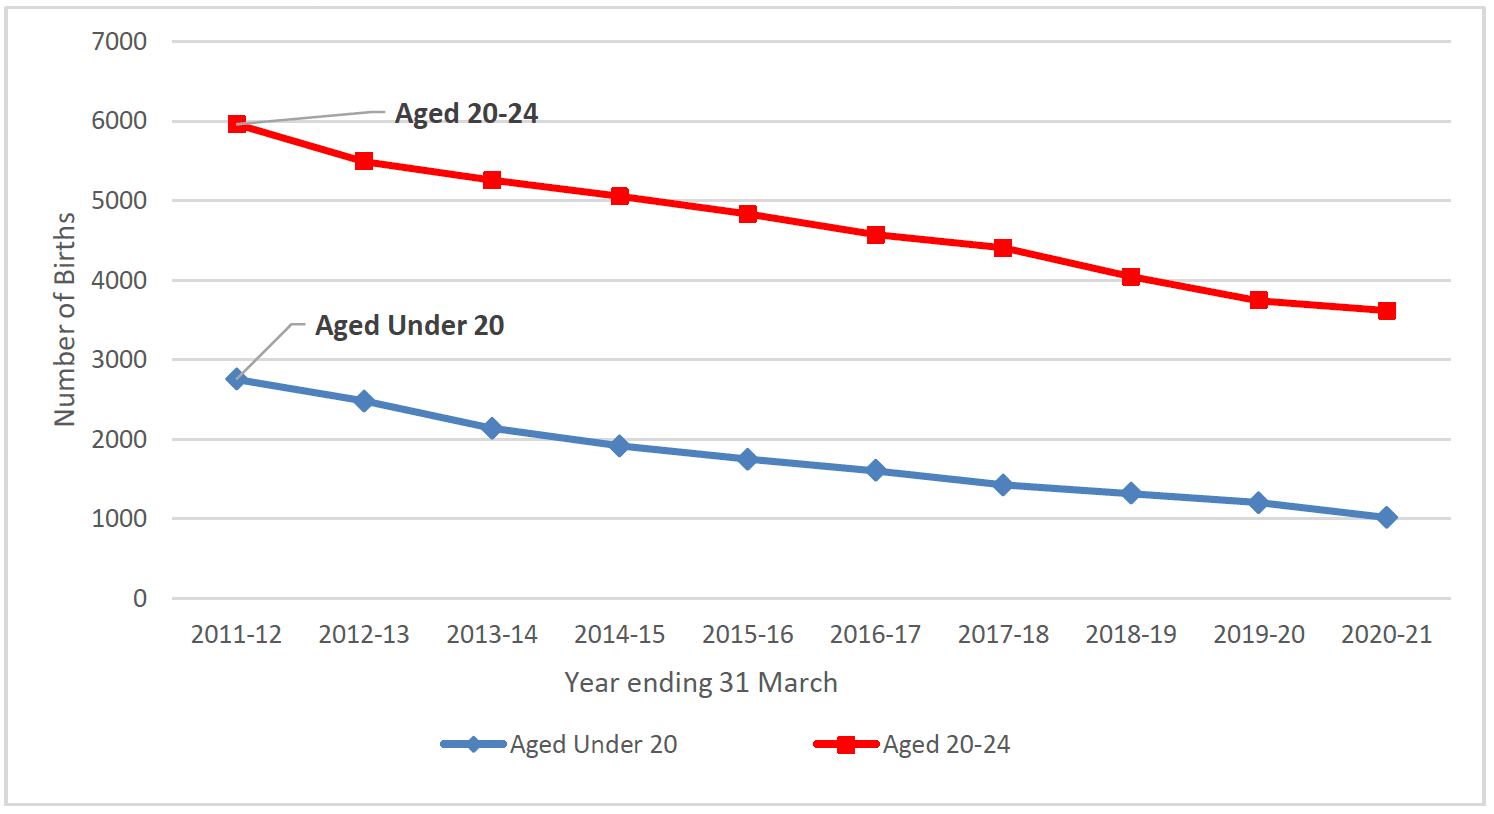 Chart 2 is a line graph showing the number of births to first time mothers in Scotland aged 20 to 24 and aged under 20. Between 2011-12 and 2020-21 the annual number of births to first time mothers aged 20-24 has almost halved and births to first time mothers aged under 20 has more than halved.